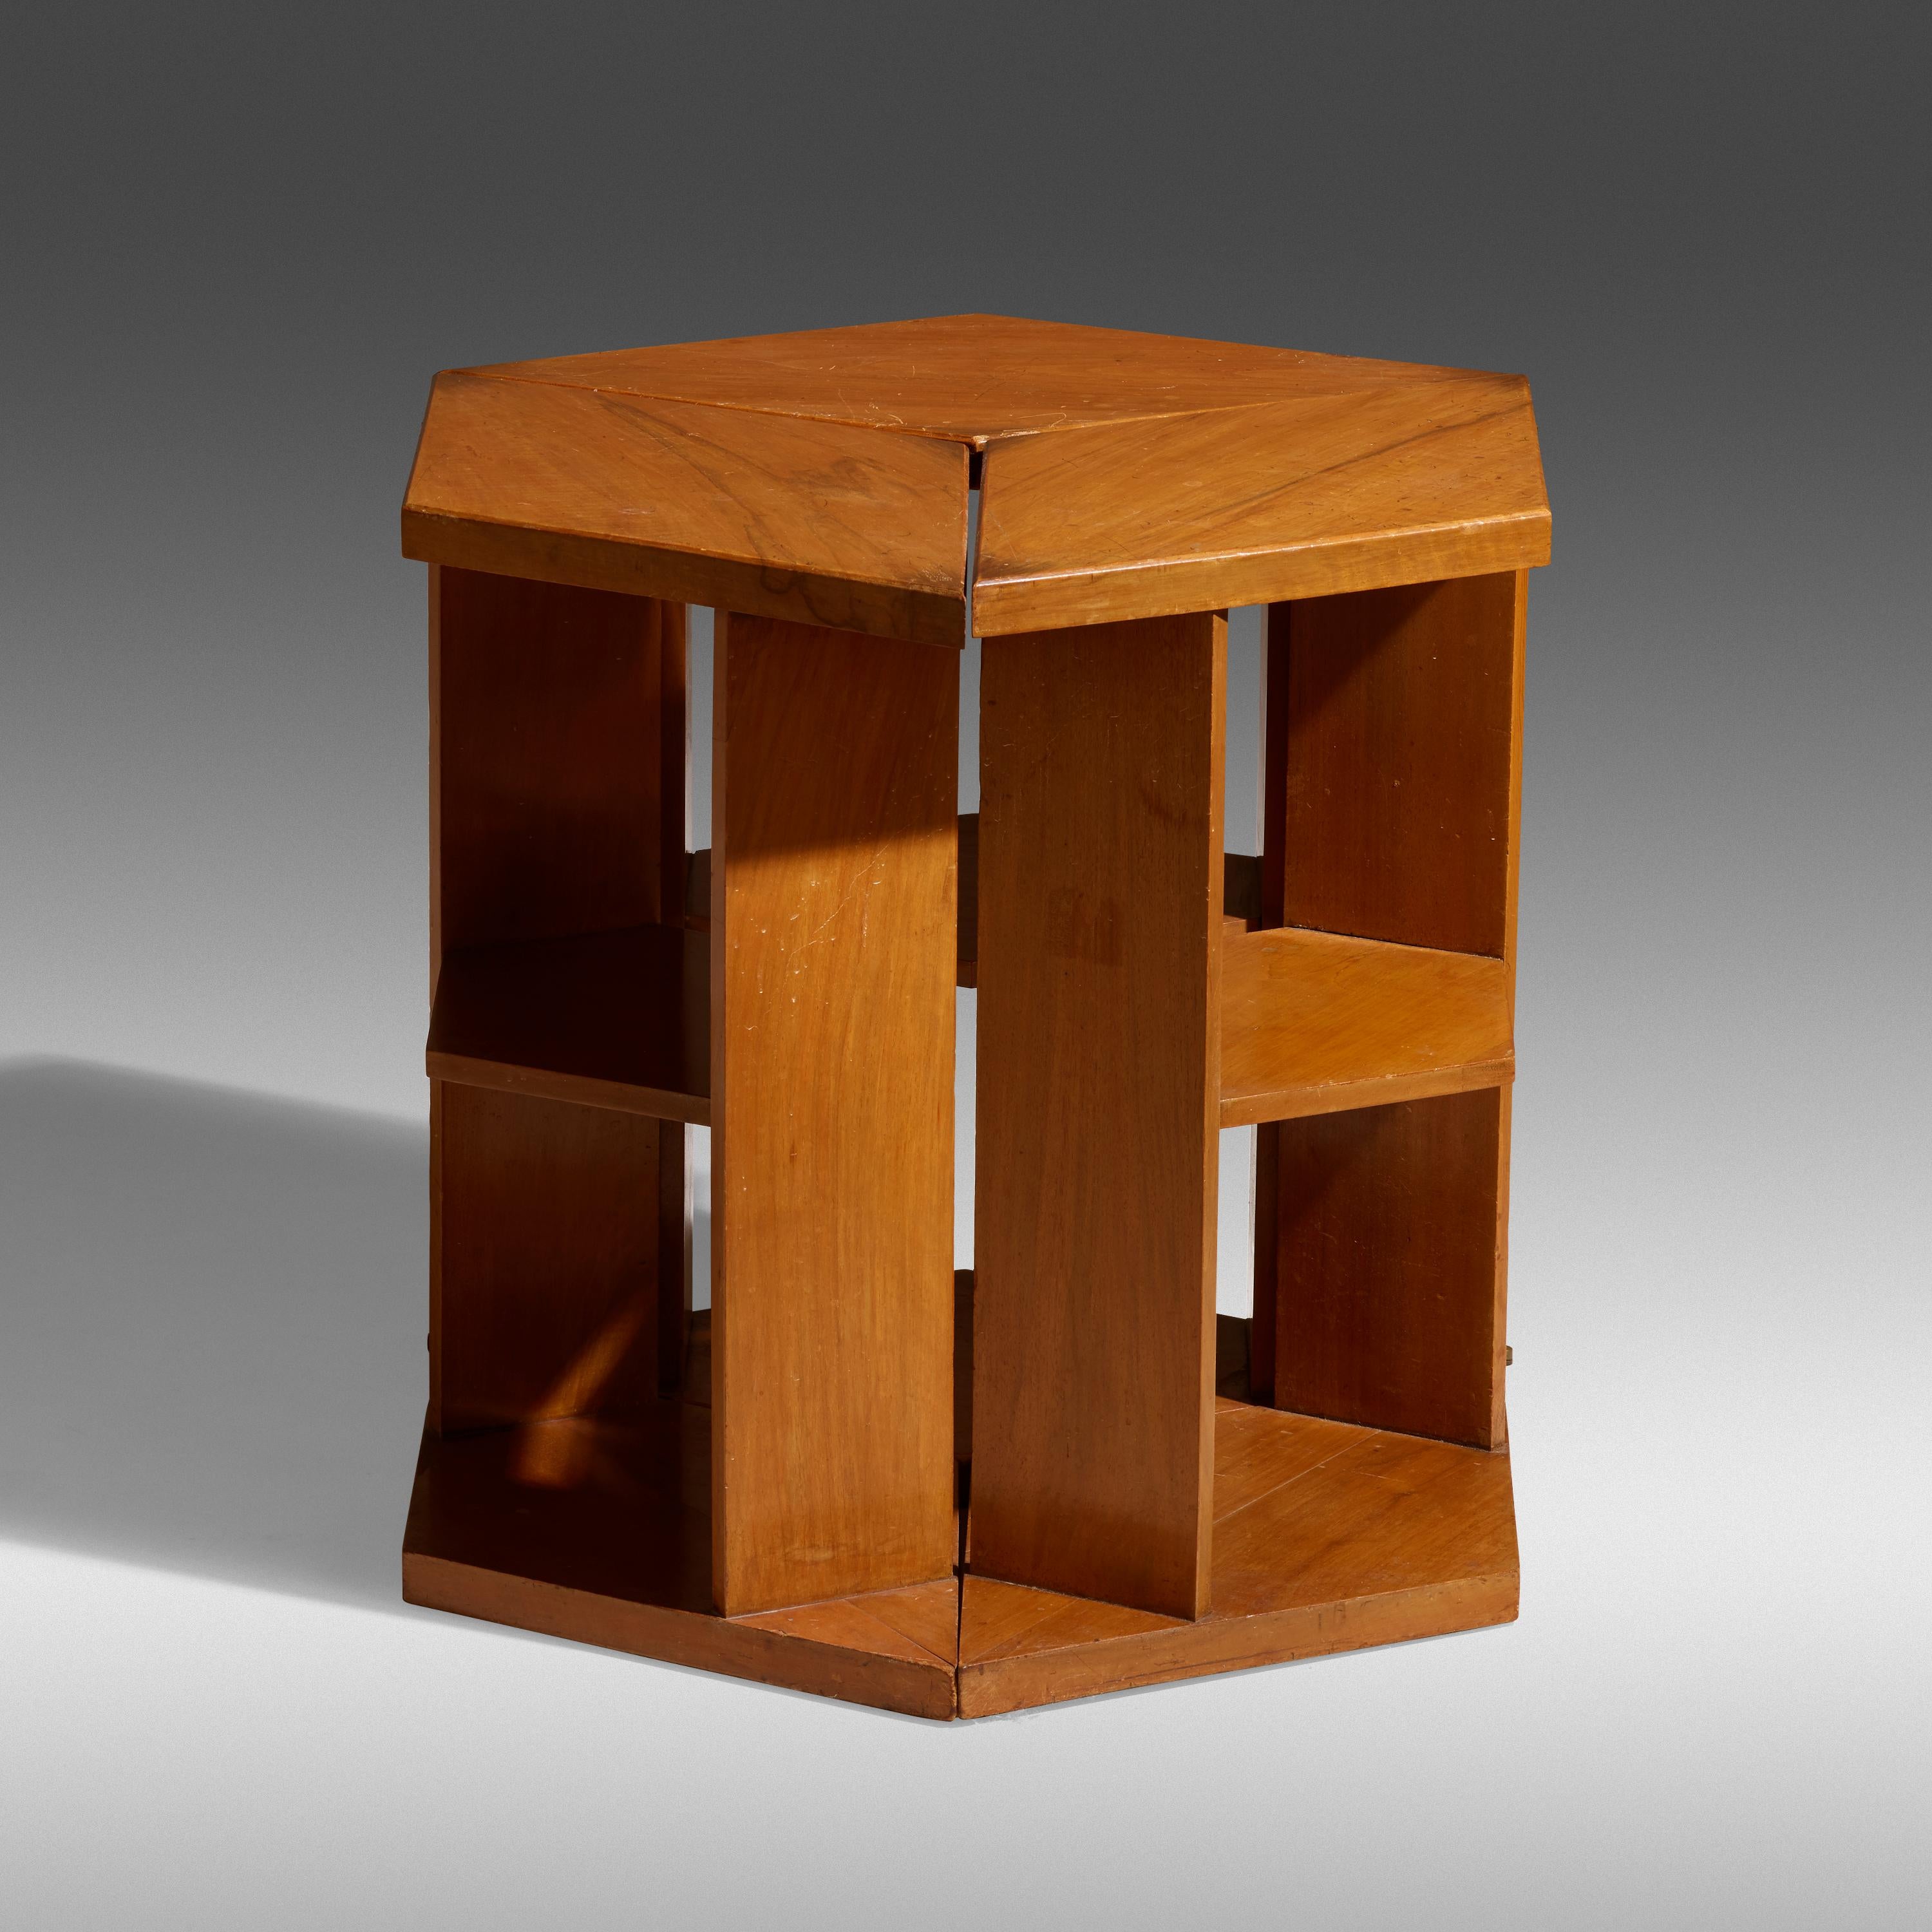 Rare walnut and Oak bookcase -table by Eugene Printz . The design of the 